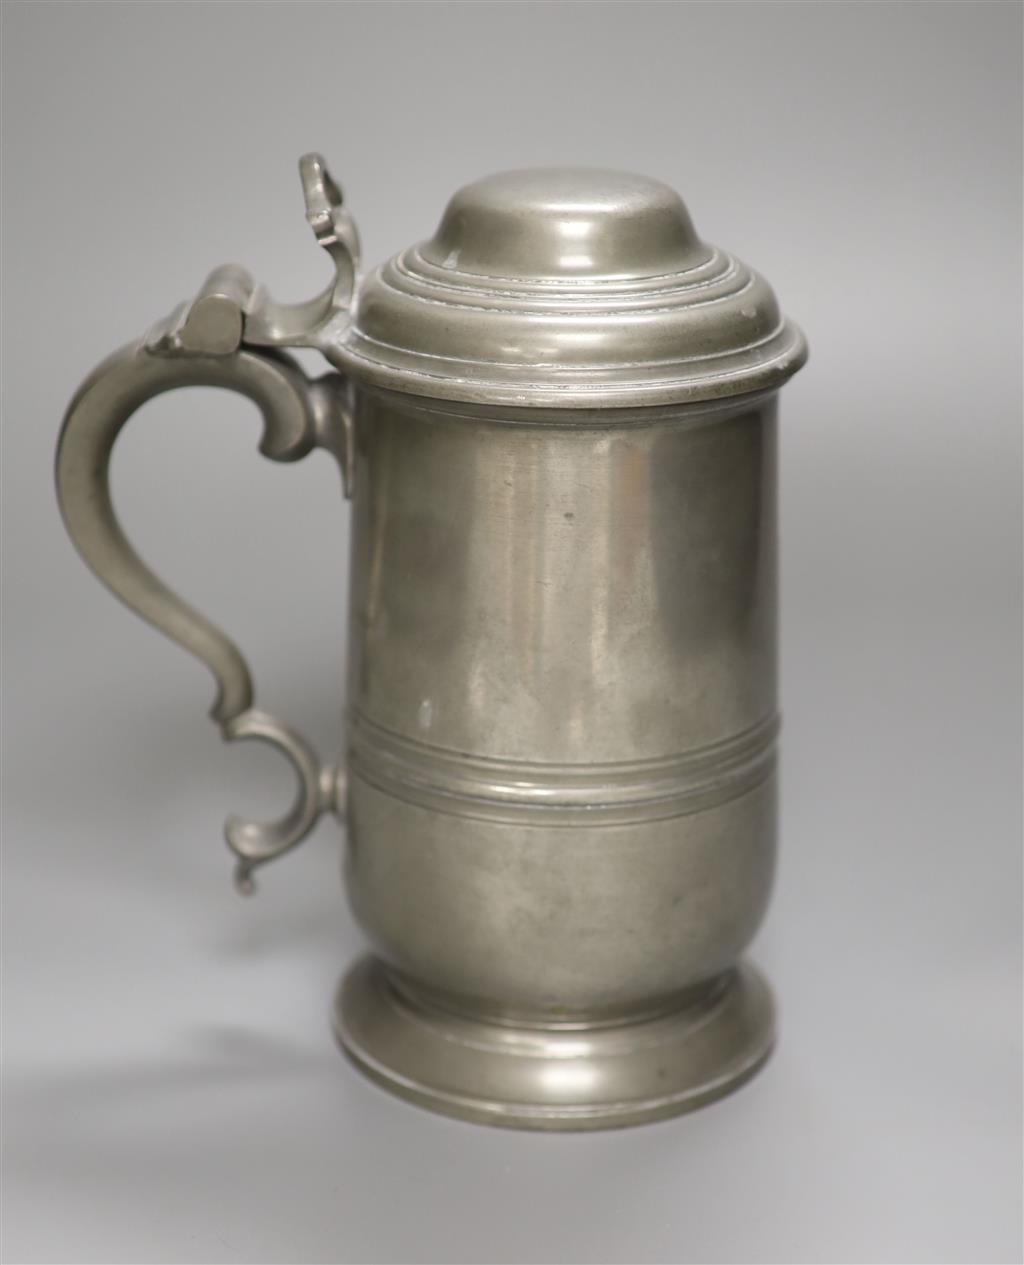 A novelty Alfred Dunhill pewter tobacco caddy, in the form of a lidded tankard, the hinged cover revealing a lidded interior, 22cm high